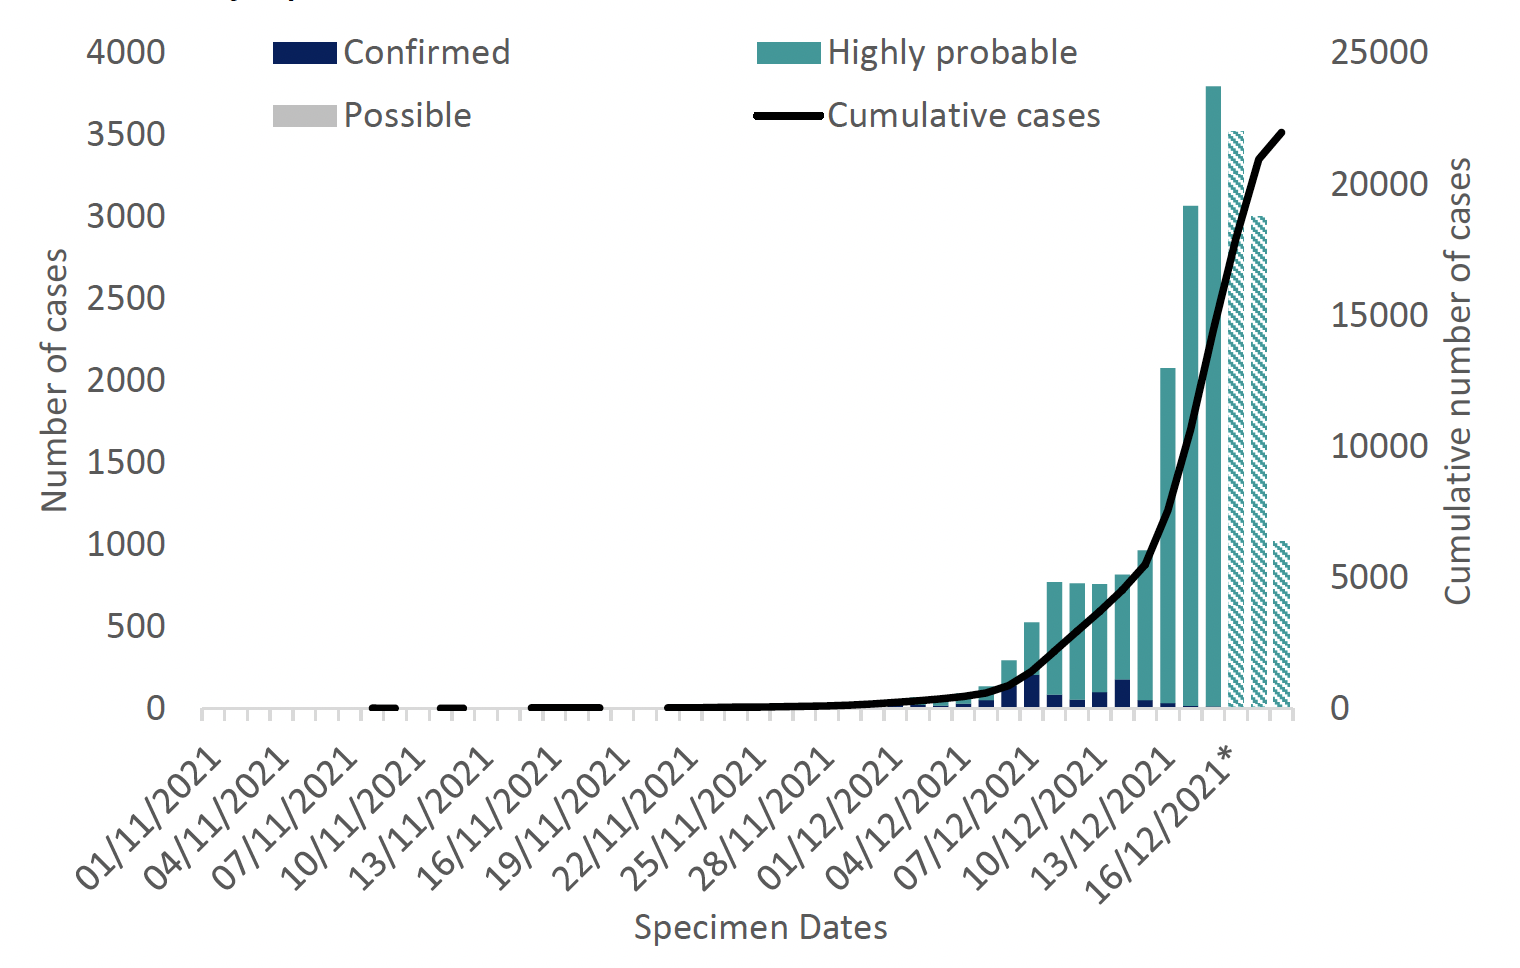 This column chart shows daily confirmed, highly probable, and possible Omicron variant cases identified in Scotland. A line tracker shows cumulative number of Omicron cases that fall in either of these categories. Cumulative Omicron cases increased from 0 in early November to over 20,000 by 19 December. 